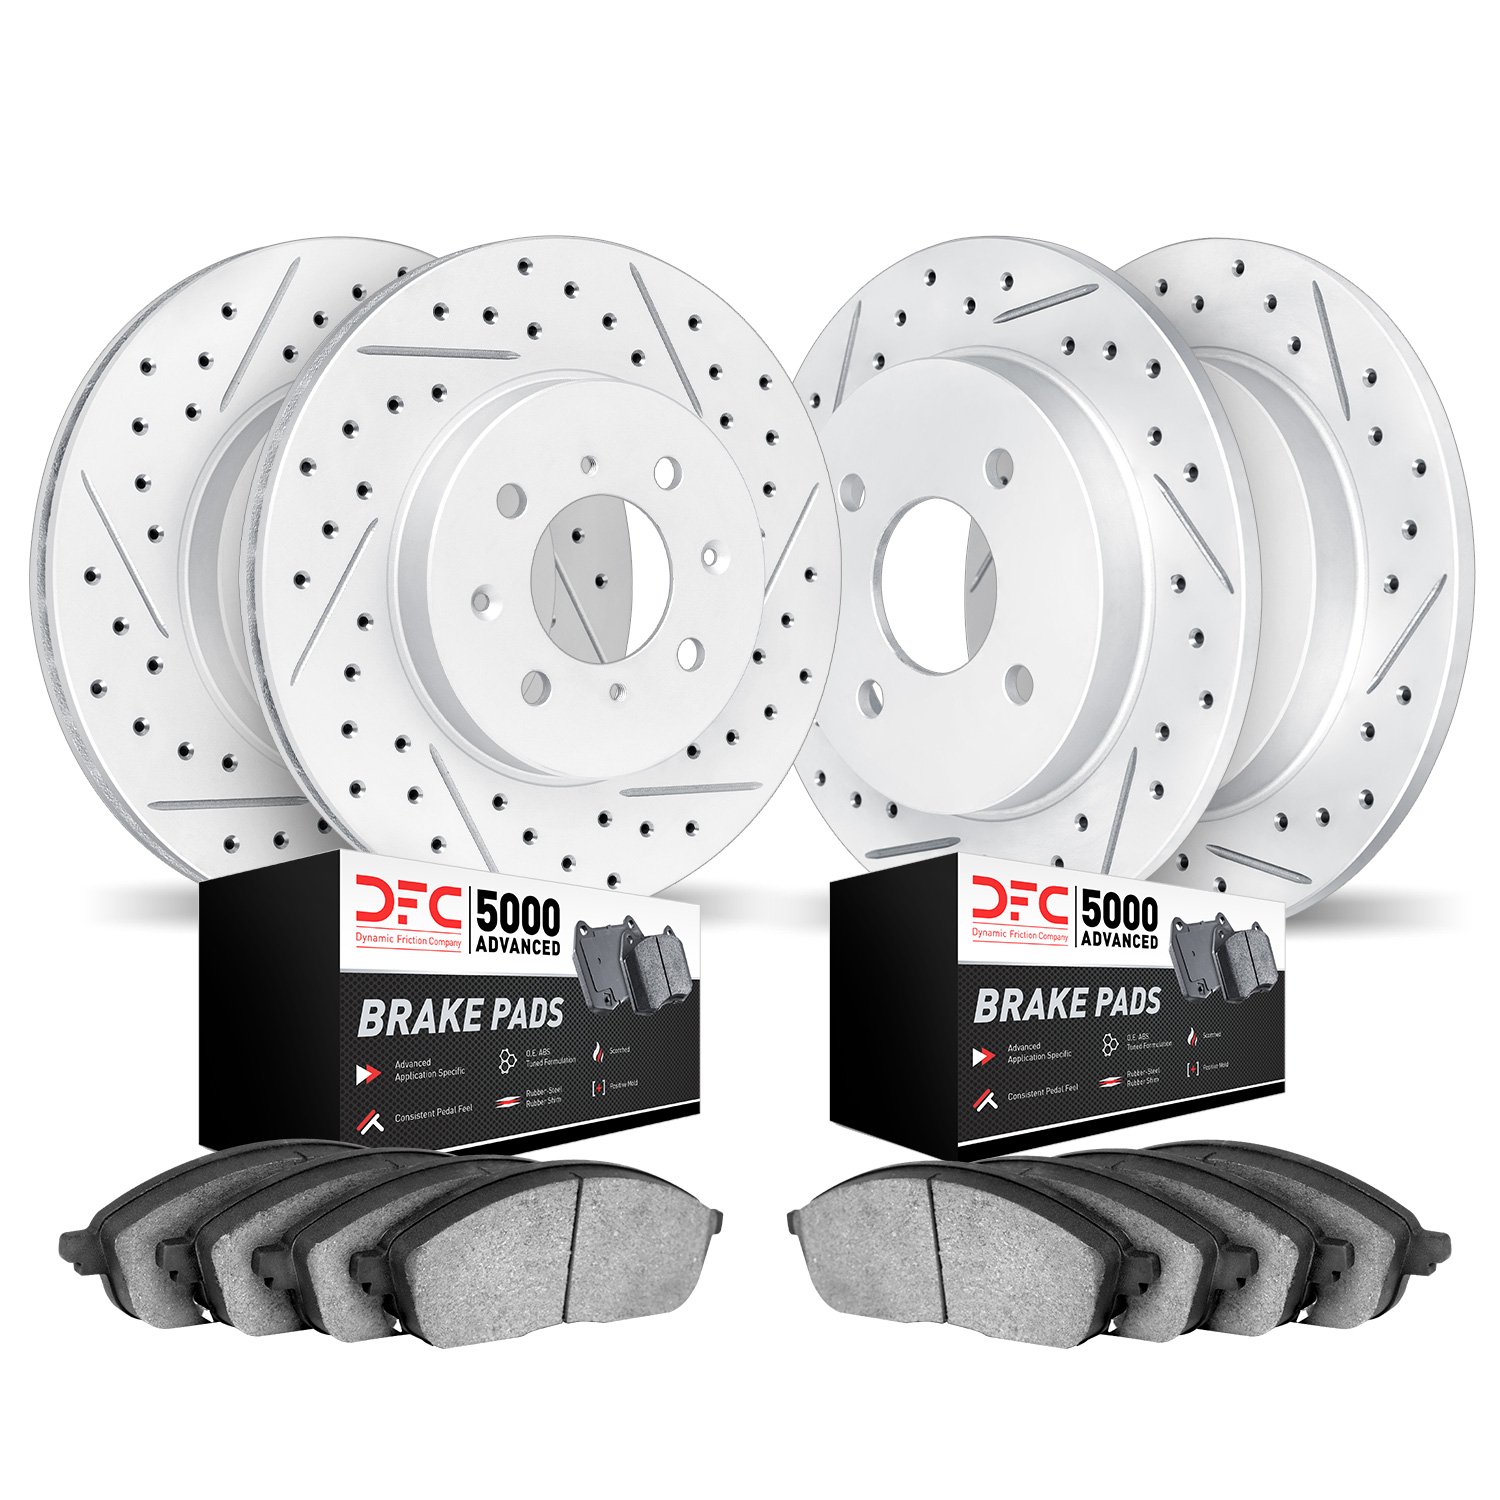 2504-32001 Geoperformance Drilled/Slotted Rotors w/5000 Advanced Brake Pads Kit, 2007-2015 Mini, Position: Front and Rear